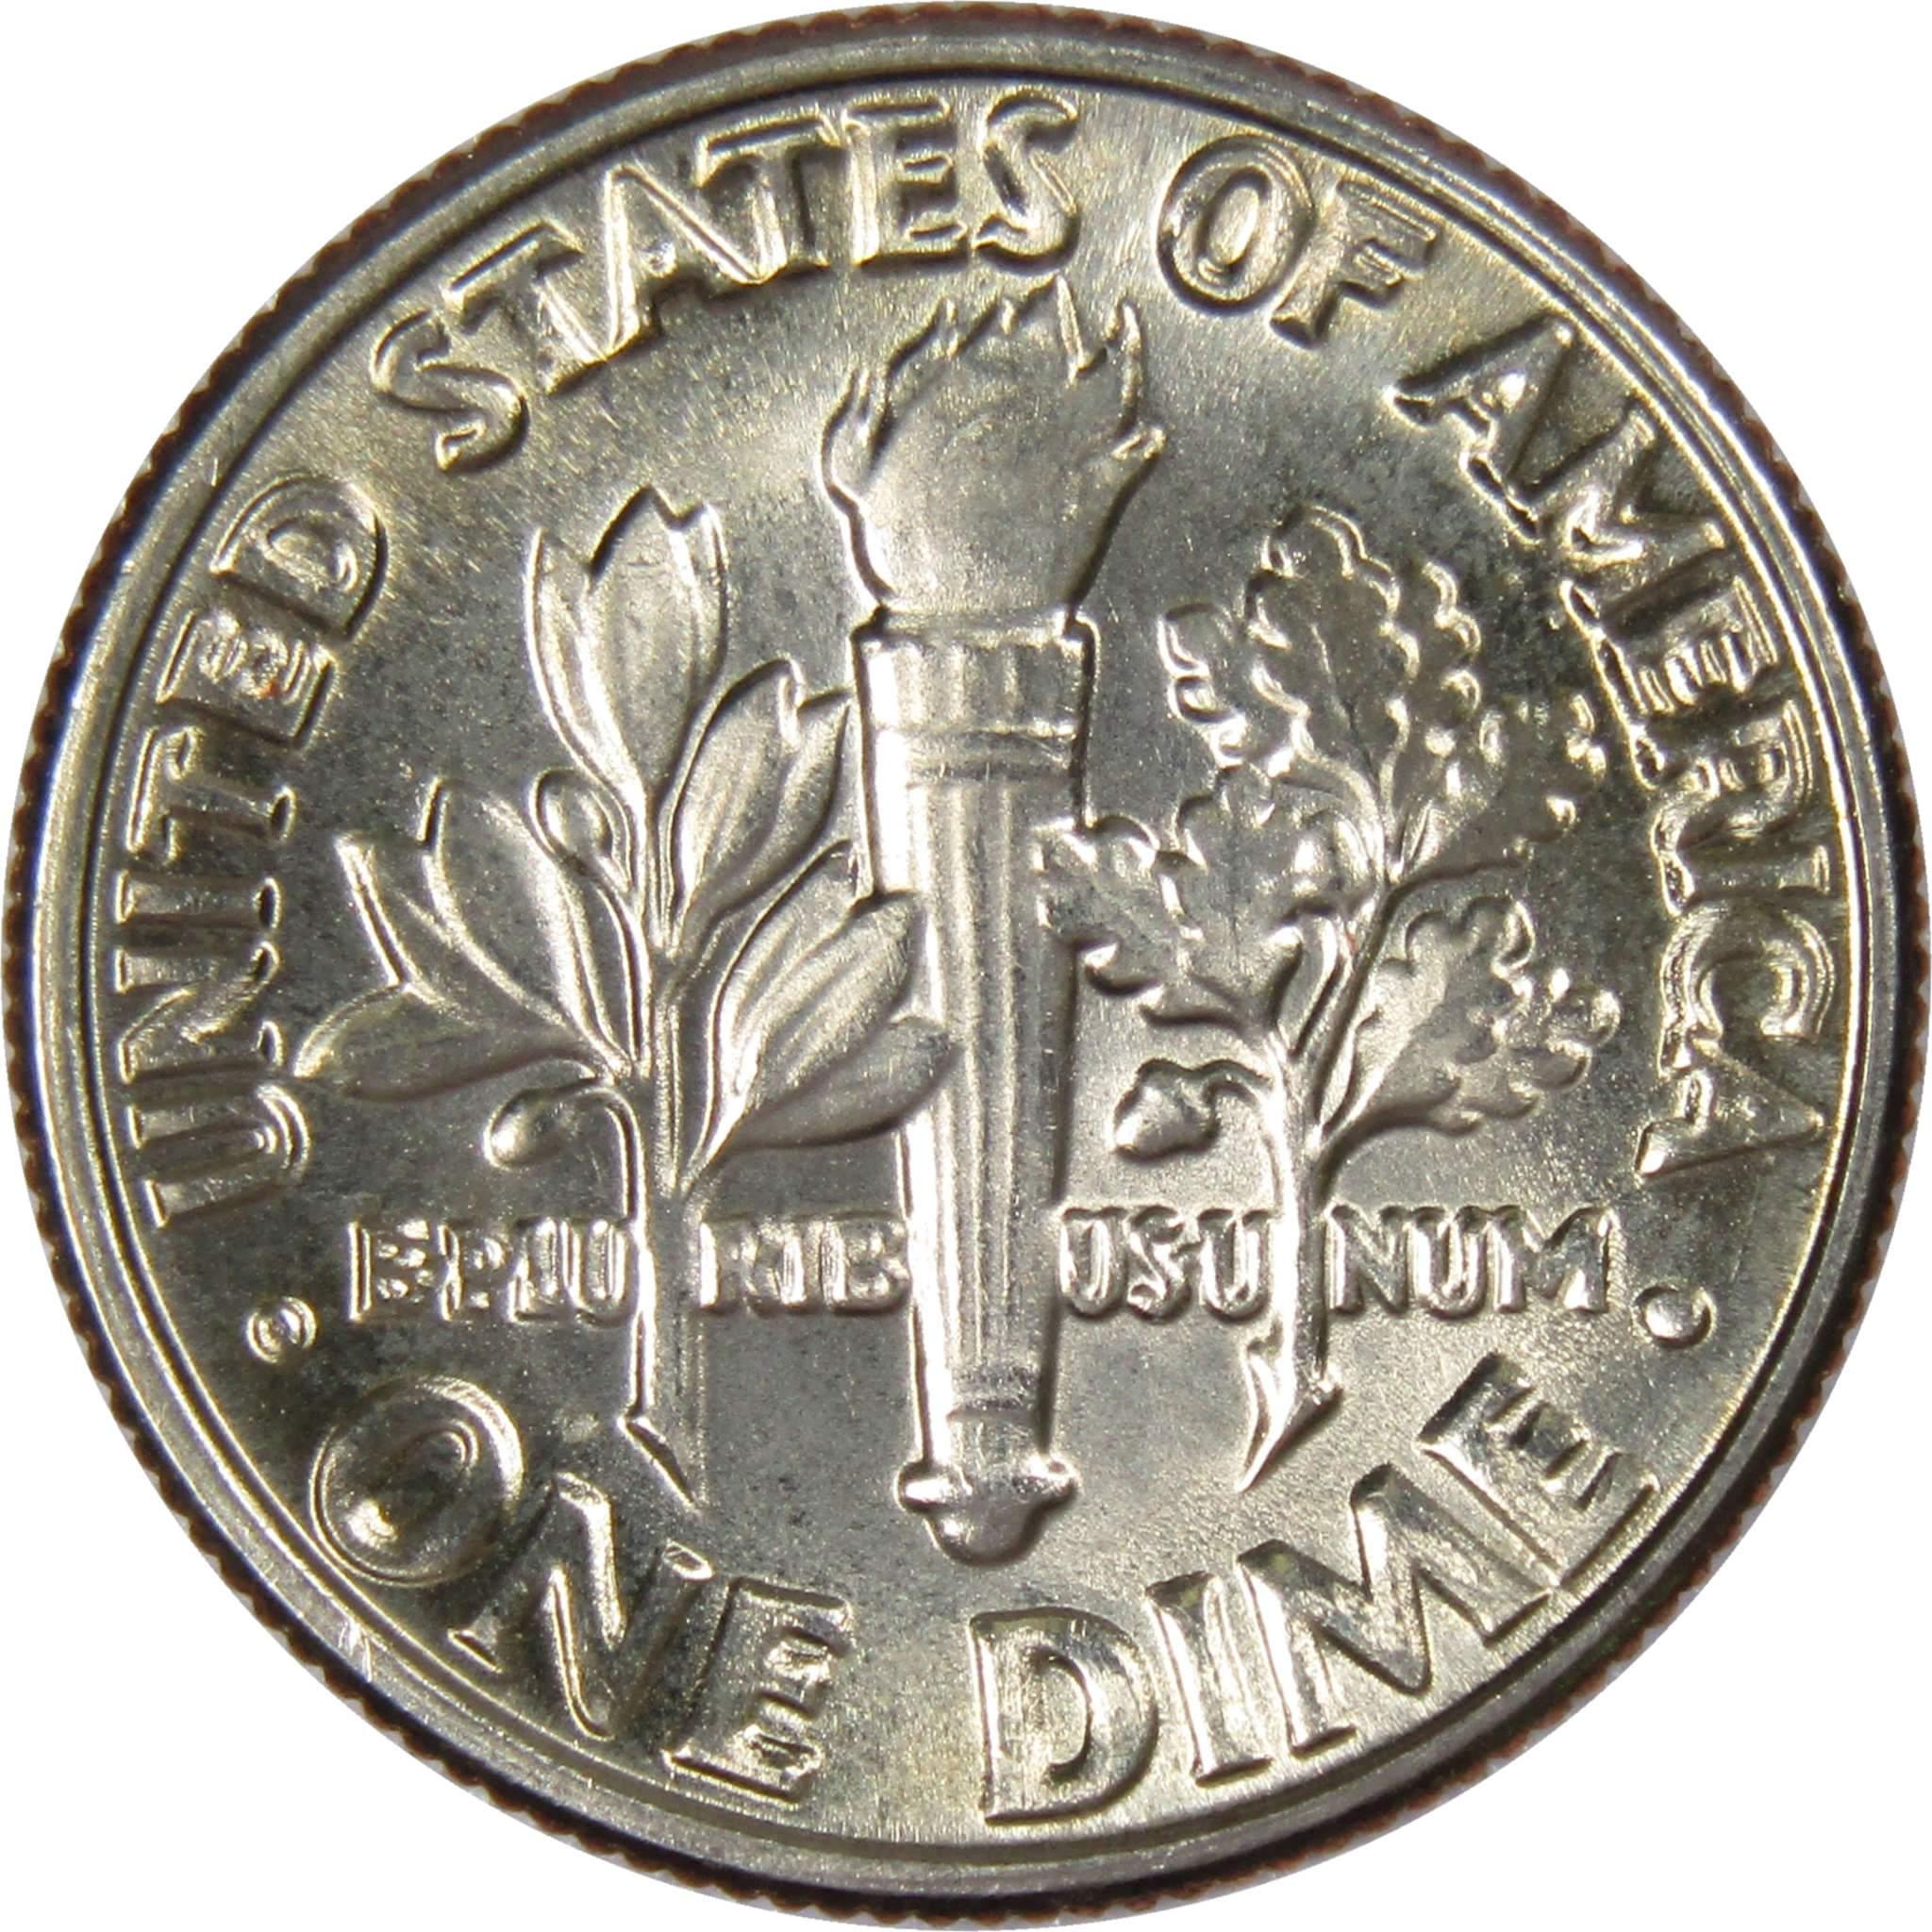 1982 D Roosevelt Dime BU Uncirculated Mint State 10c US Coin Collectible